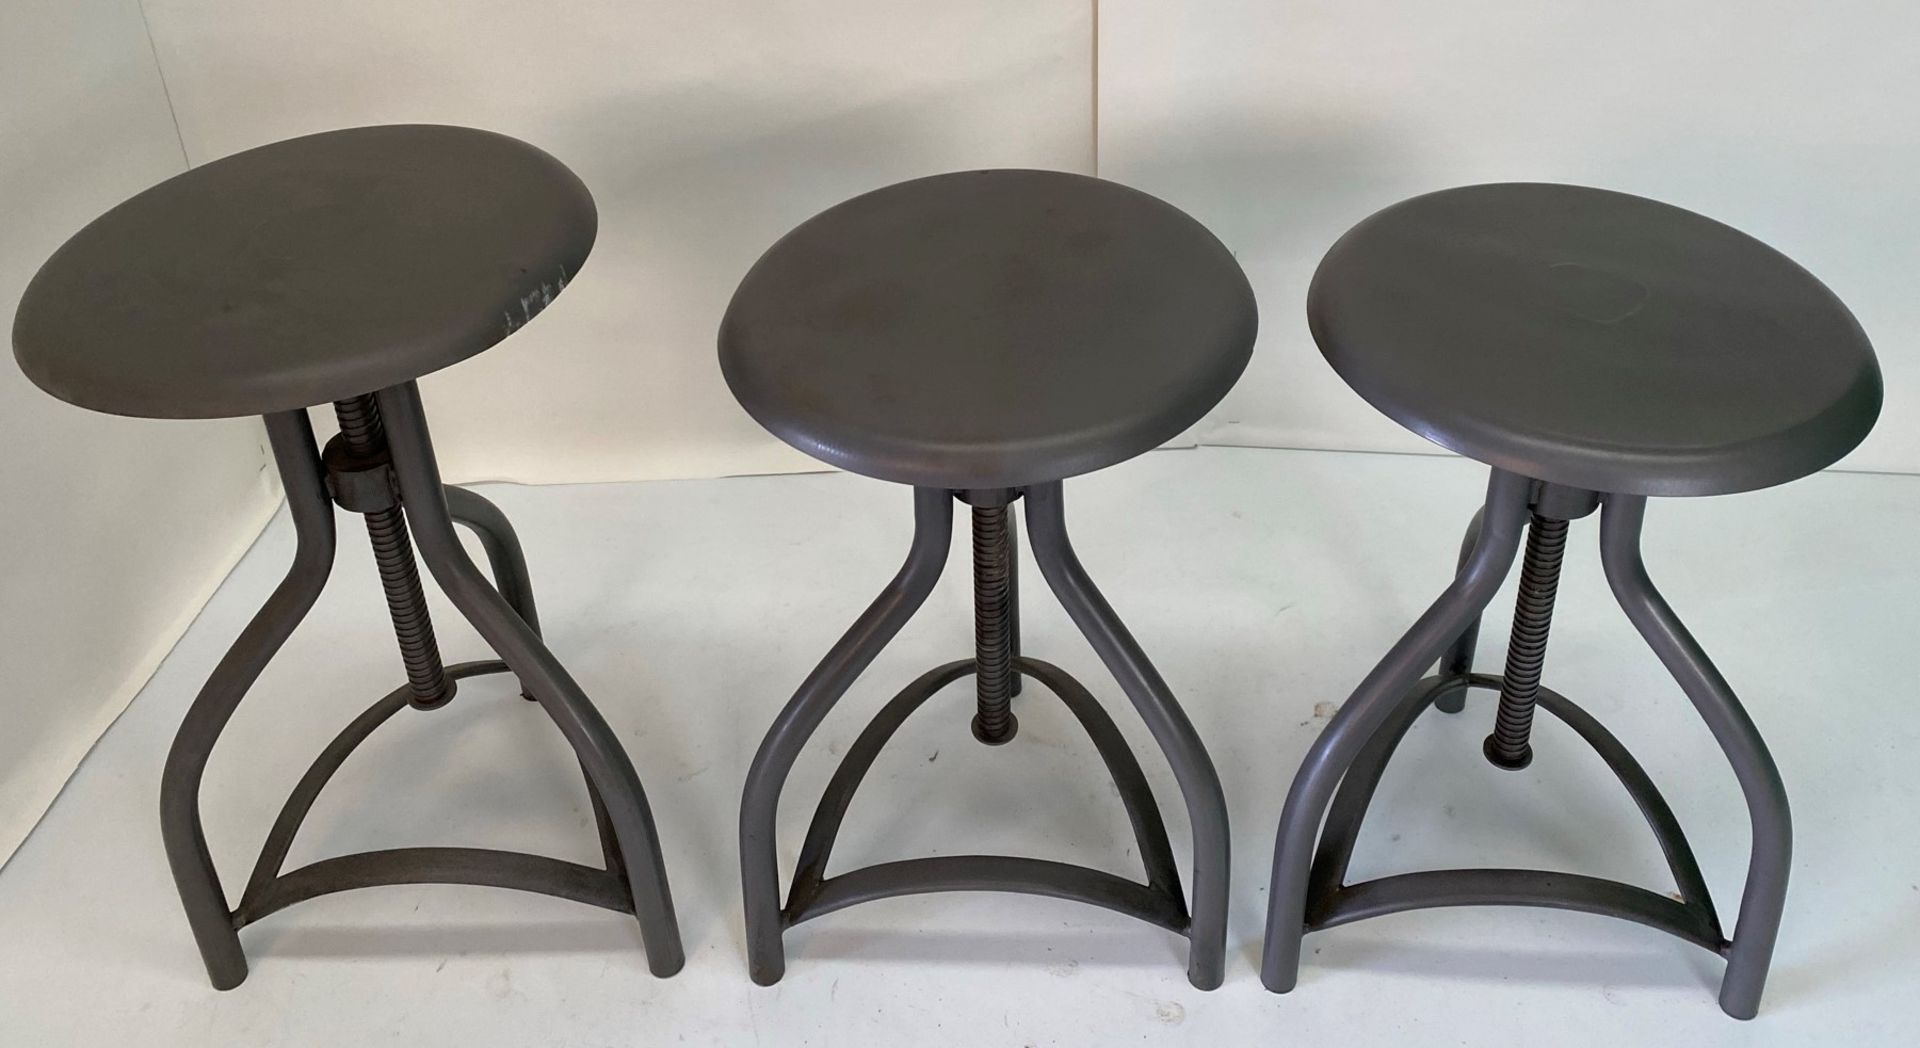 3 x Industrial swivel low stool with metal seat - One seat has a dent/scruff on the side - Image 2 of 2